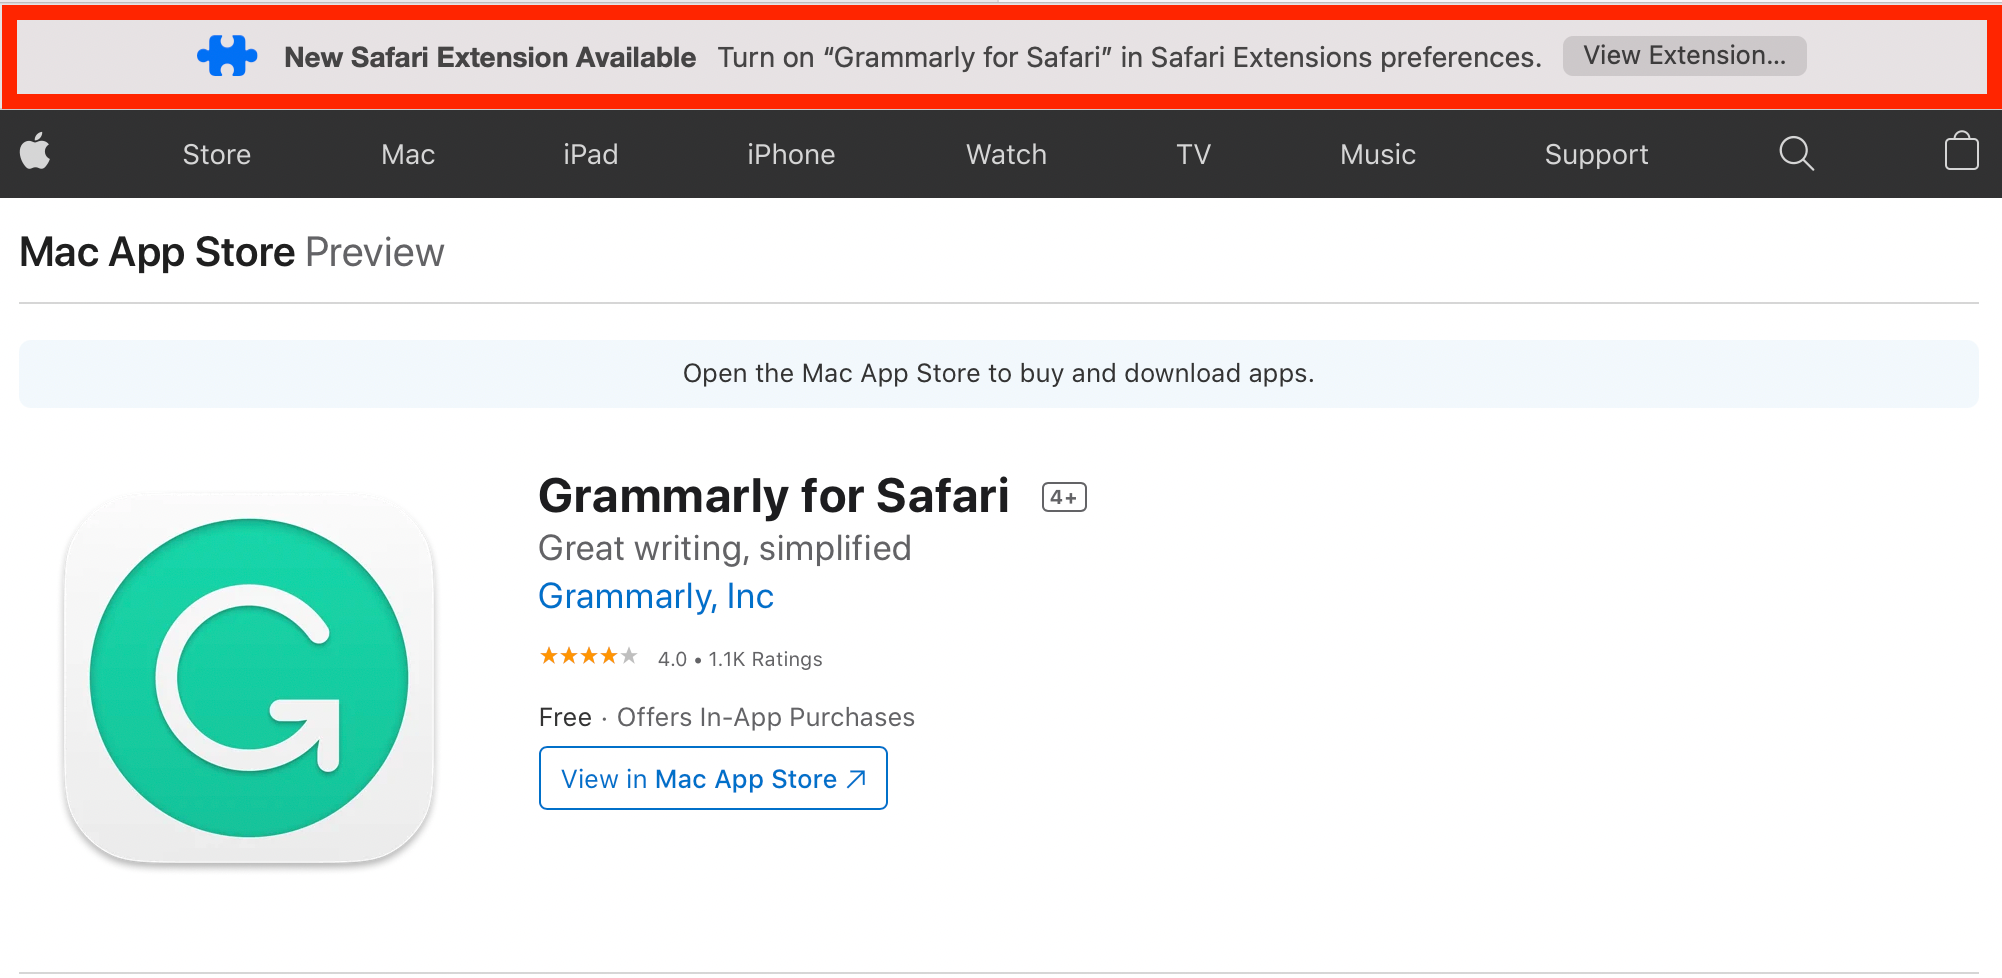 New Safari Extension Available